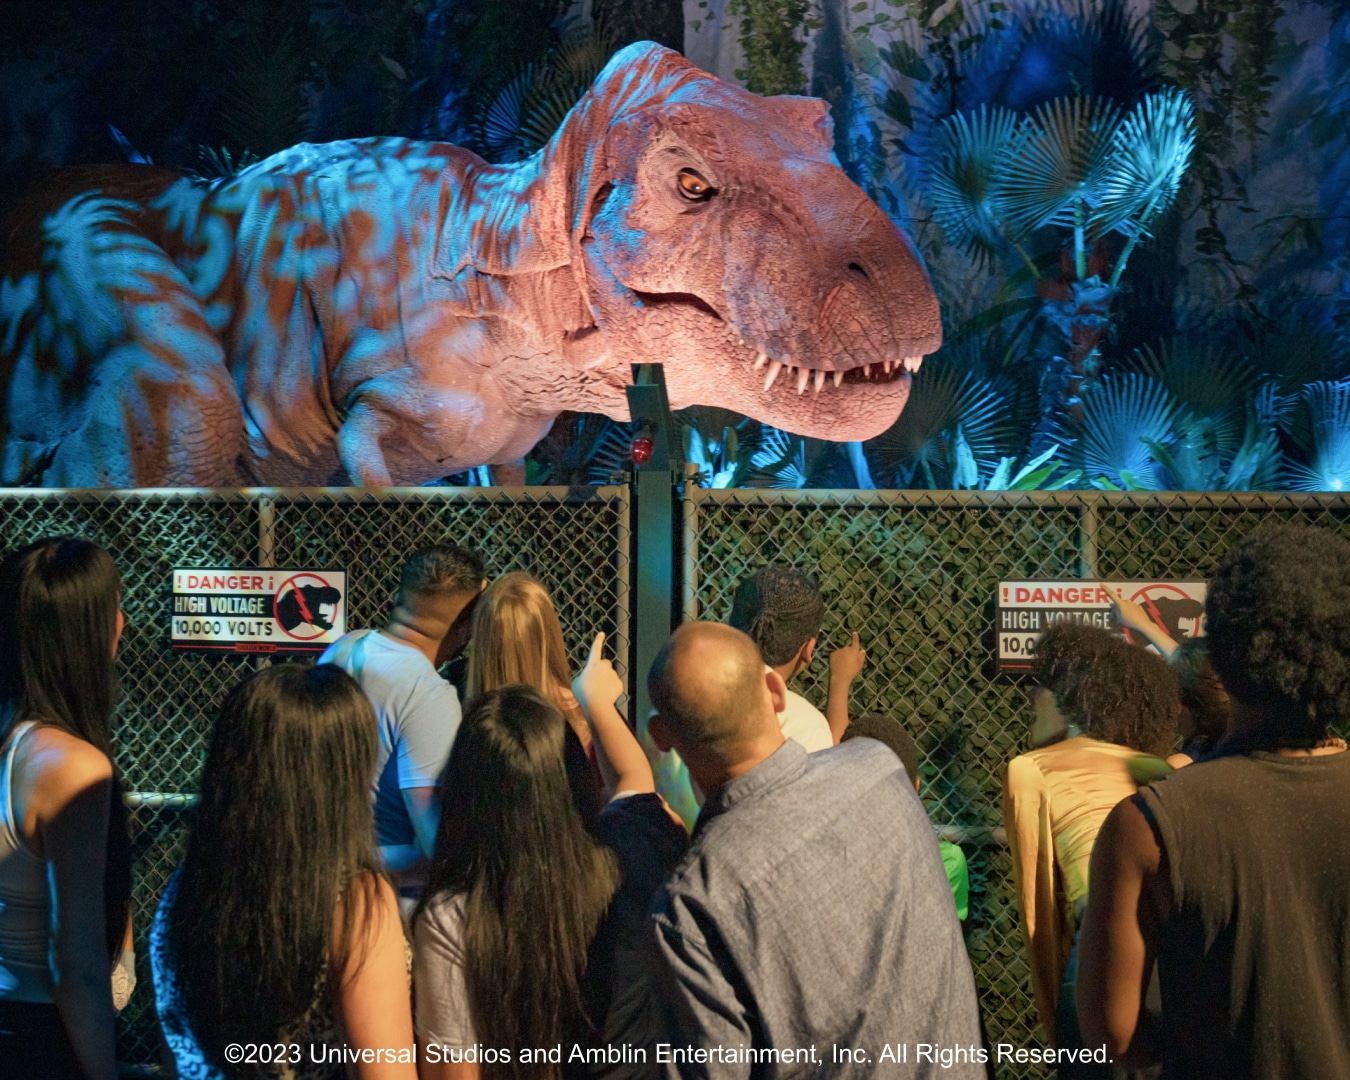 This Jurassic World Exhibition Is Coming To Atlanta Next Week